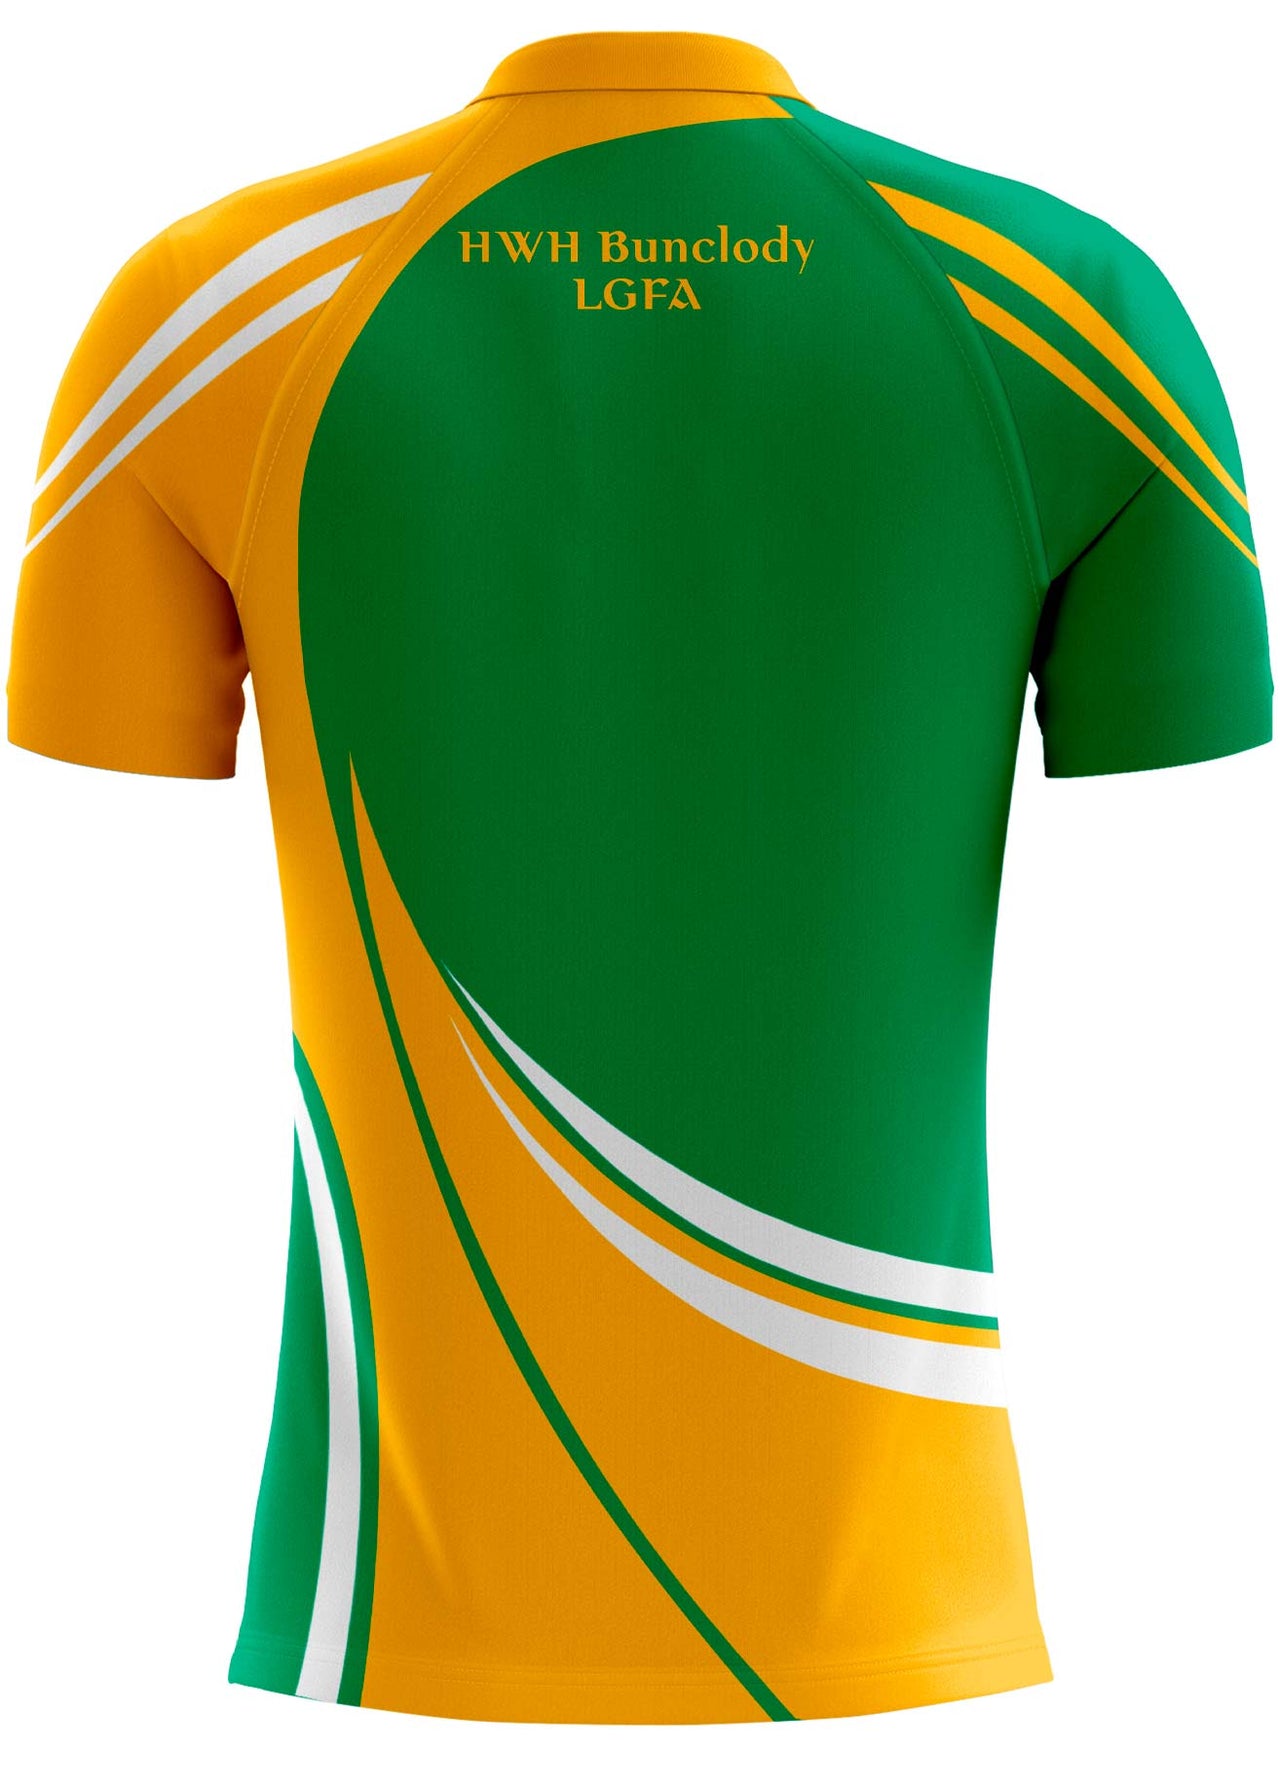 HWH Bunclody LGFA Home Jersey Player Fit Adult